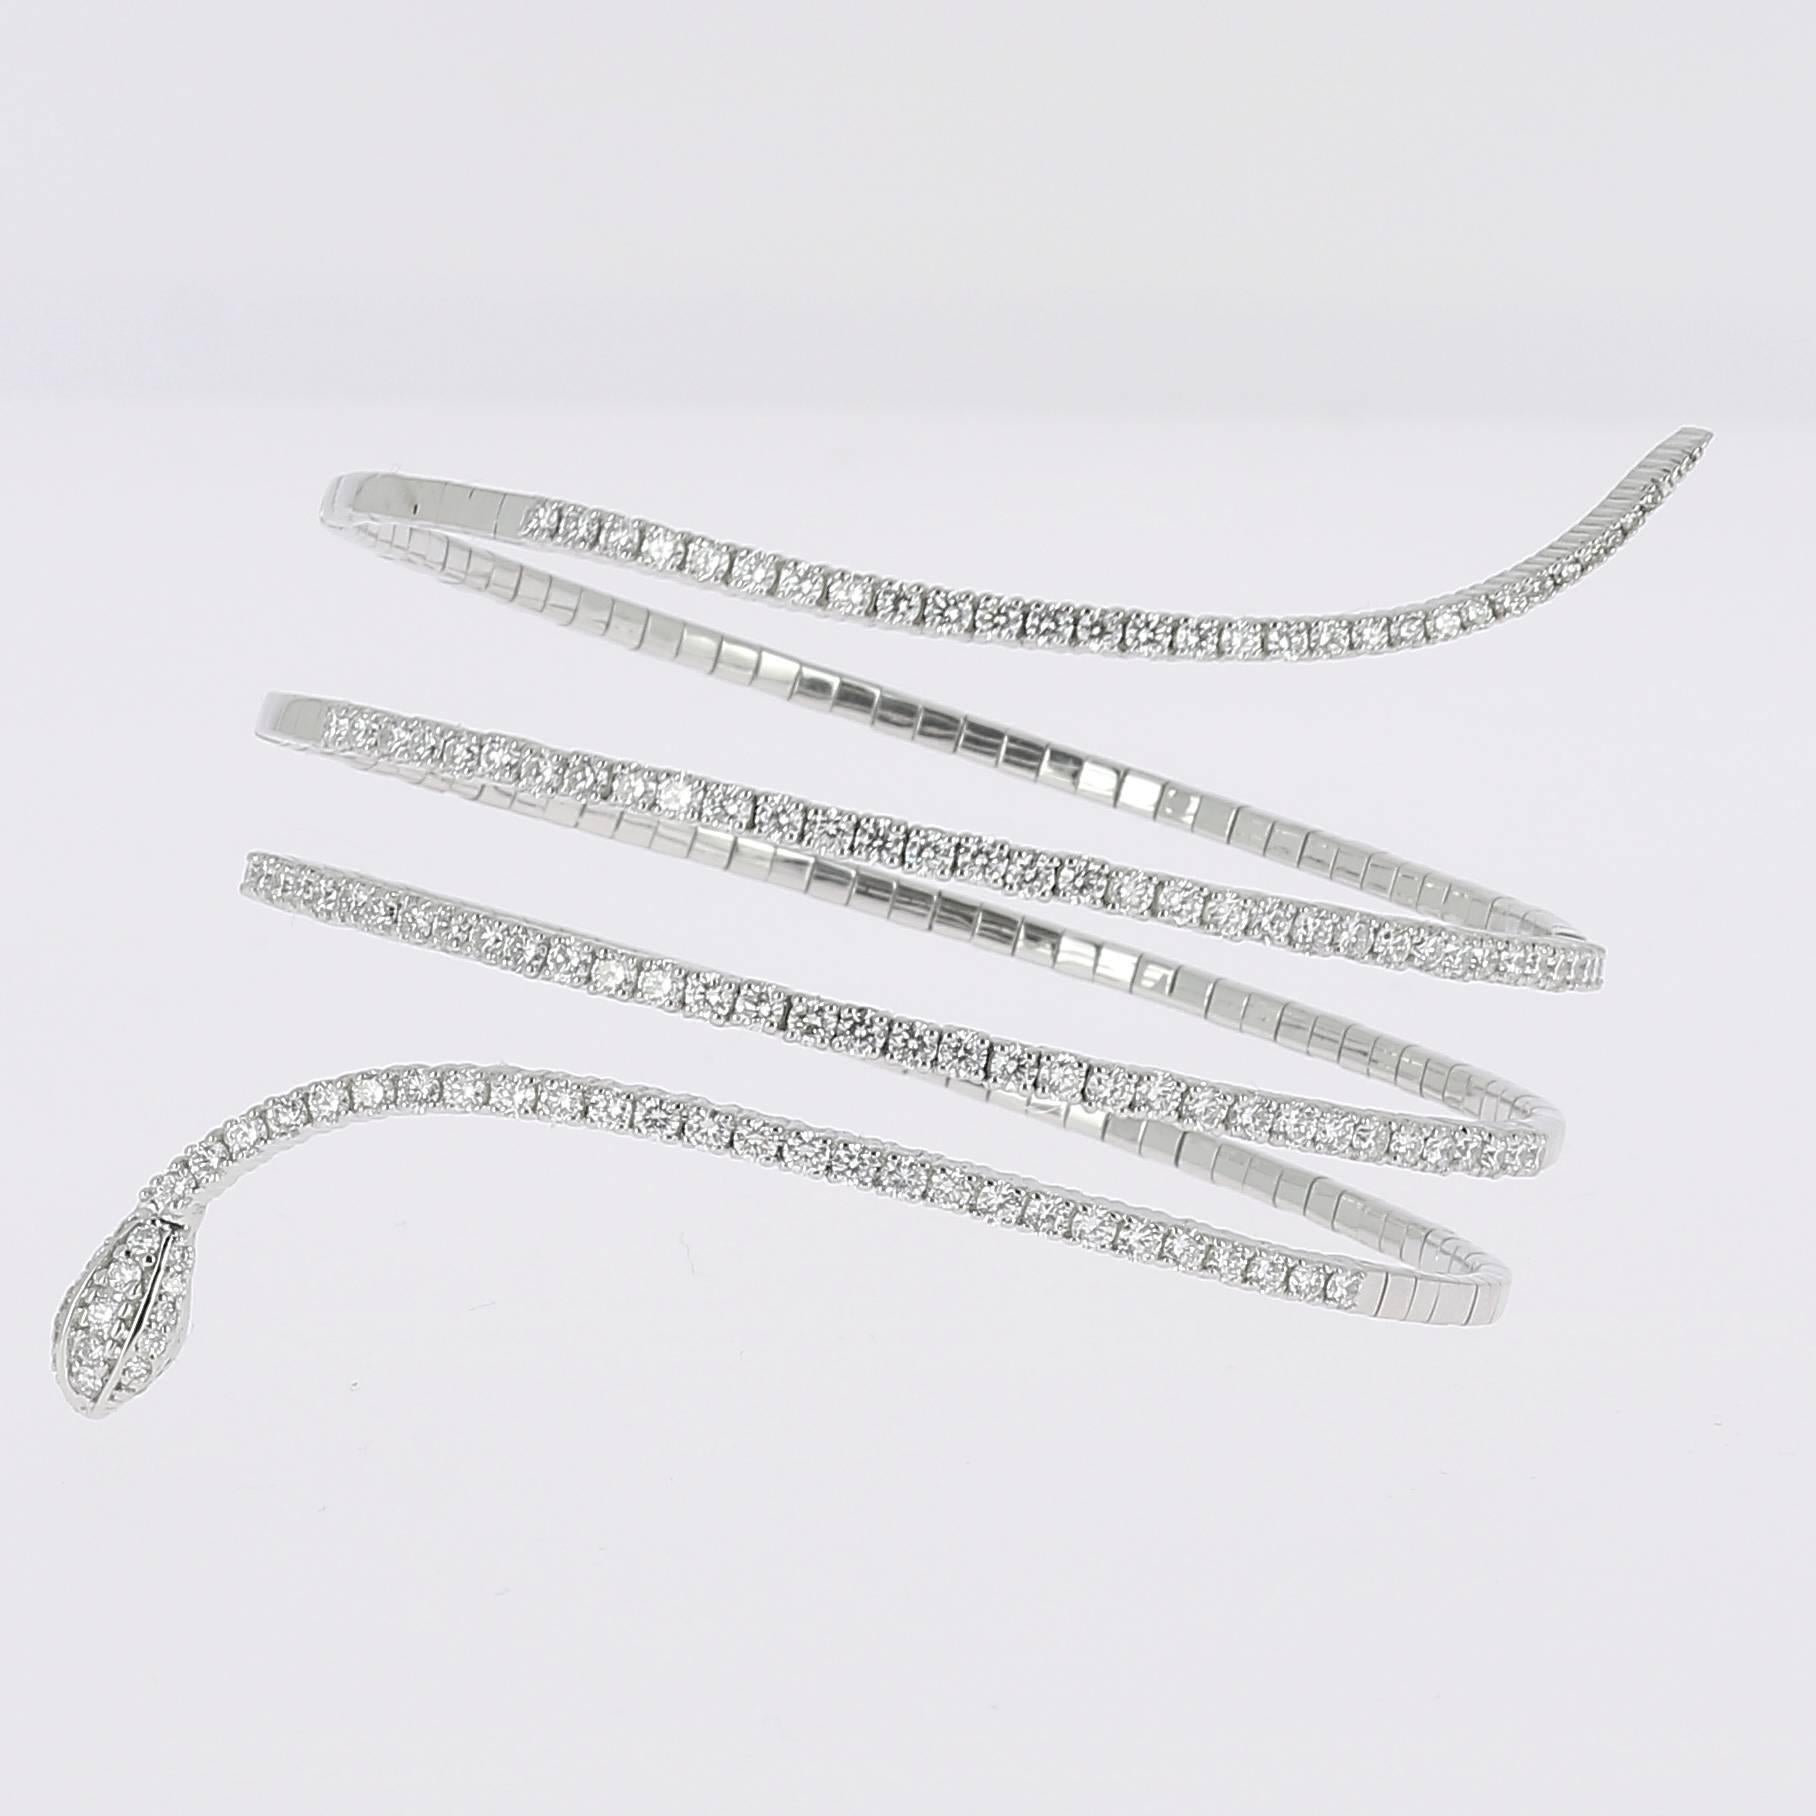 Beautiful And Modern Flexible Bracelet set by 4 rounds paved with Round Diamonds on all of the body of Snake.
There are 2.91 Carats in Diamonds.
The Diamond are GVS qualities.
The Bracelet is 18K White Gold.
